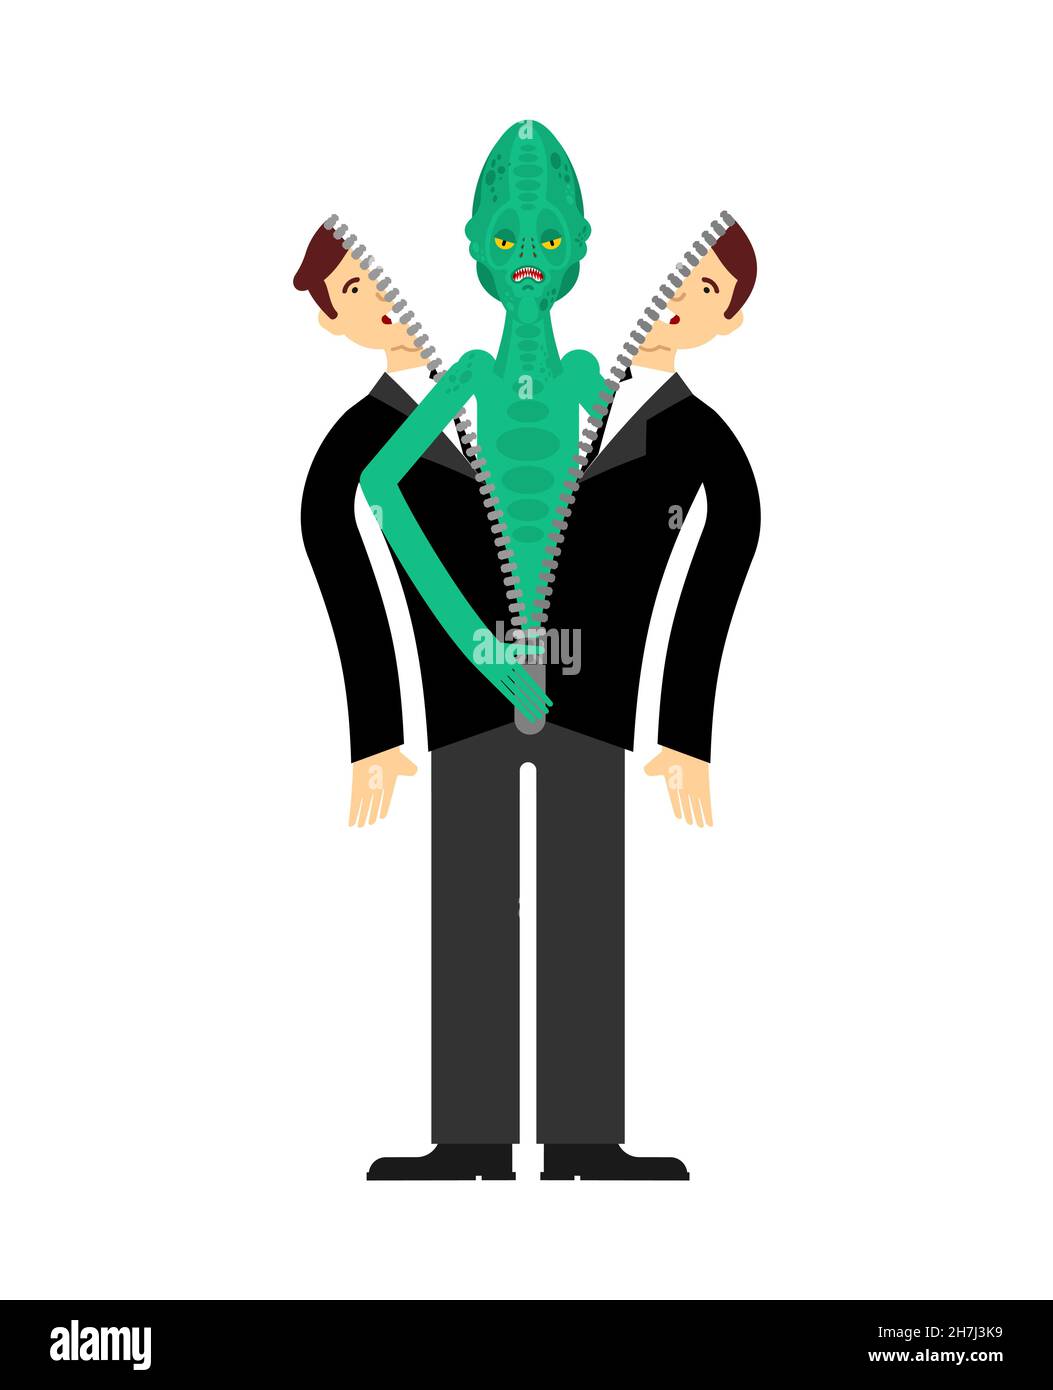 Reptilian Inside Man. Alien land invaders. Reptilian conspiracy theory. reptiloid humanoid beings from another planet with green skin. theory secret g Stock Vector